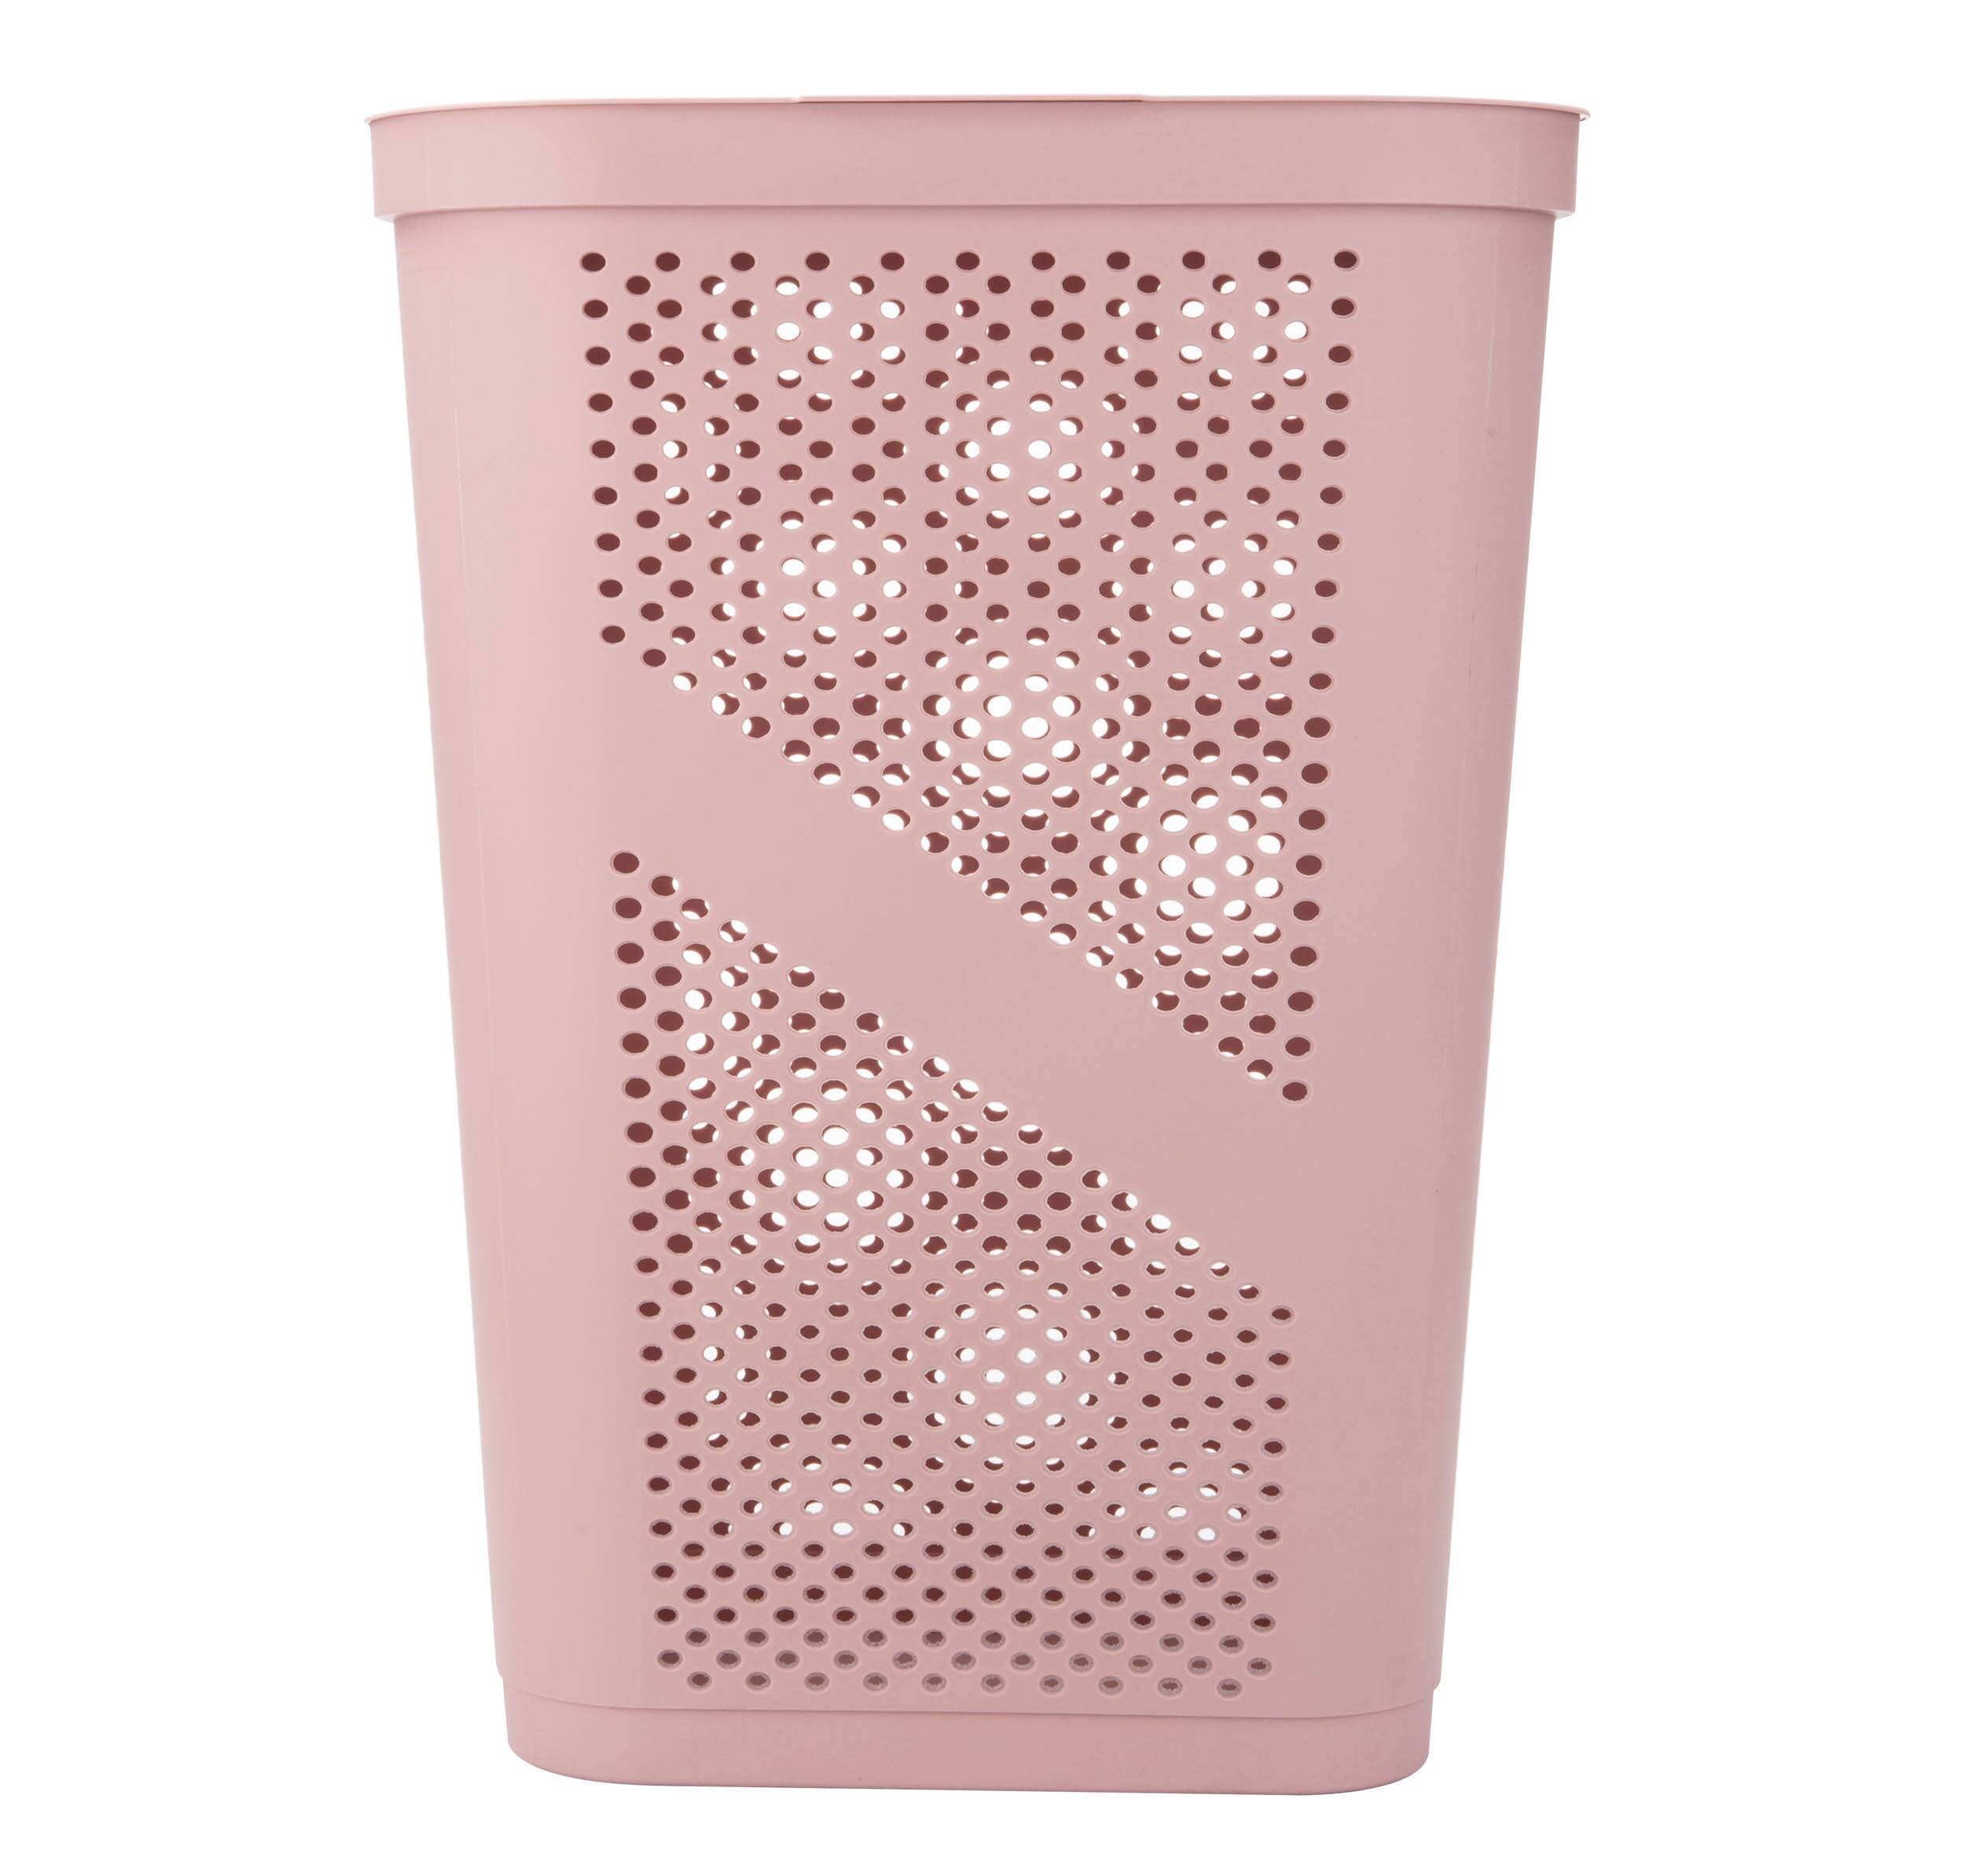 Mind Reader 60L Perforated Plastic Laundry Hamper with Lid